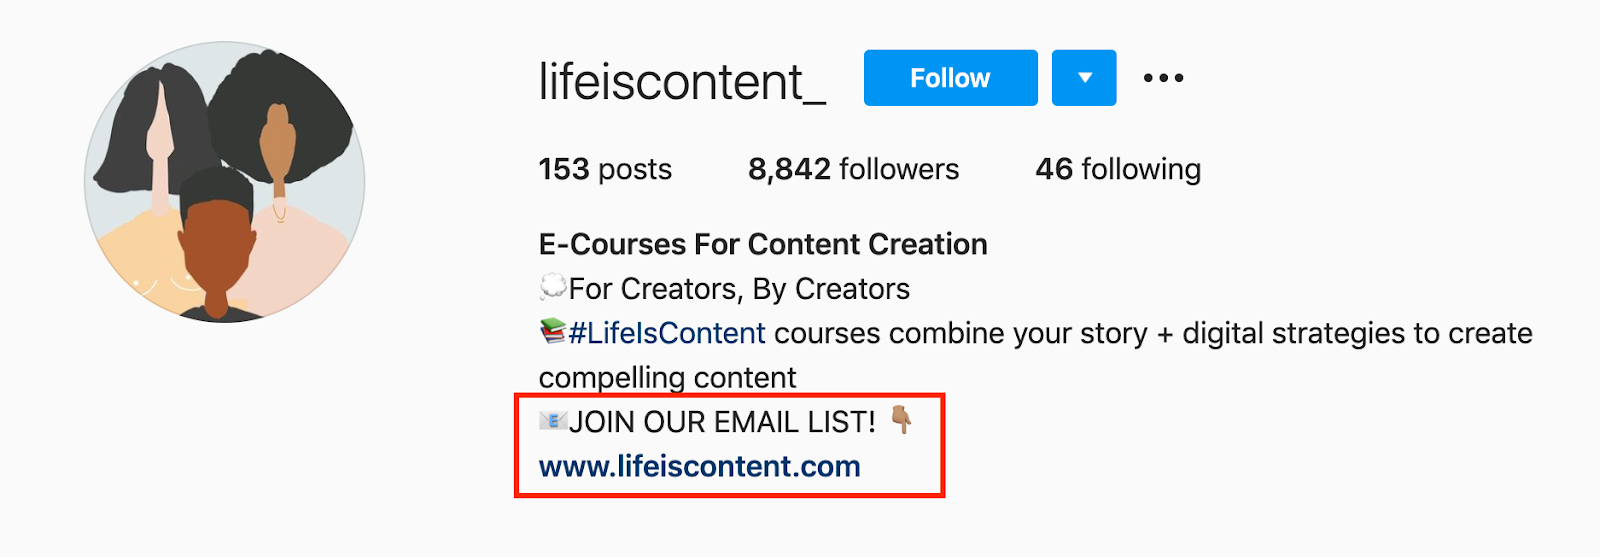 joining email list cta in the instagram bio